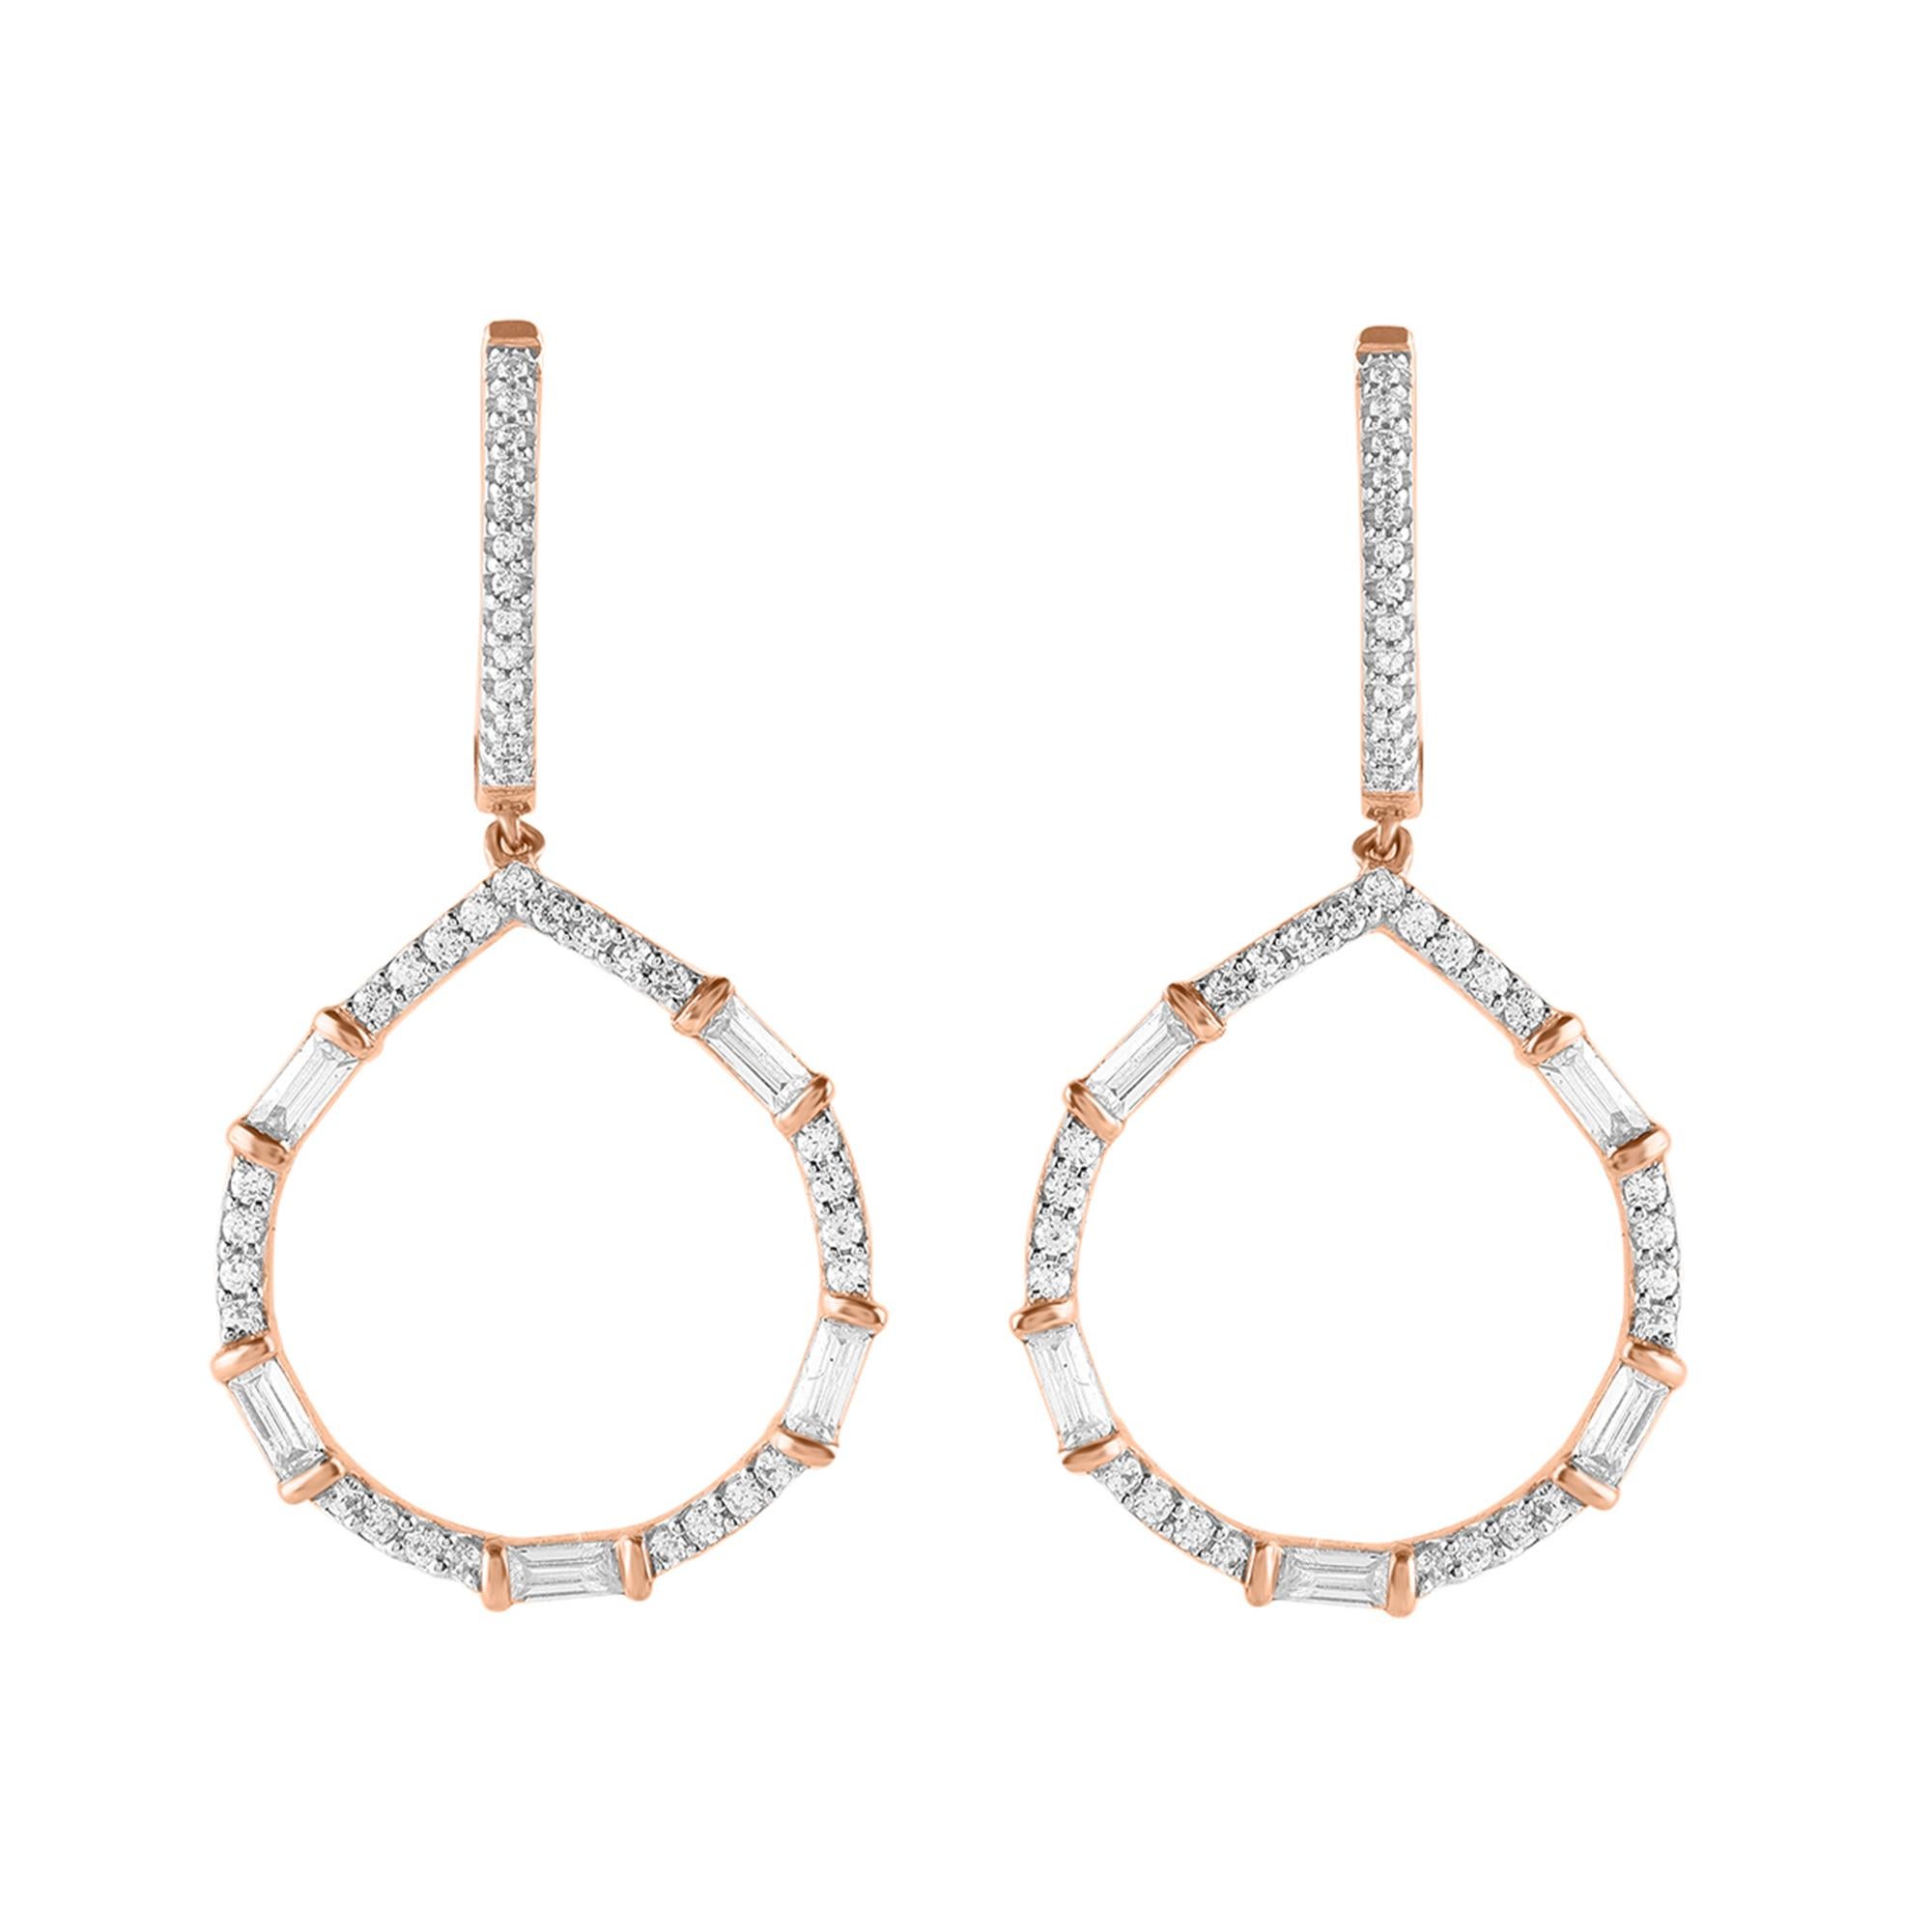 Just her style, these sparkling diamond teardrop earrings are certain to dazzle and delight. Handcrafted by our experts in 14 karat rose gold and studded with 86 round brilliant and baguette-cut diamond in prong and channel setting, glitters in H-I